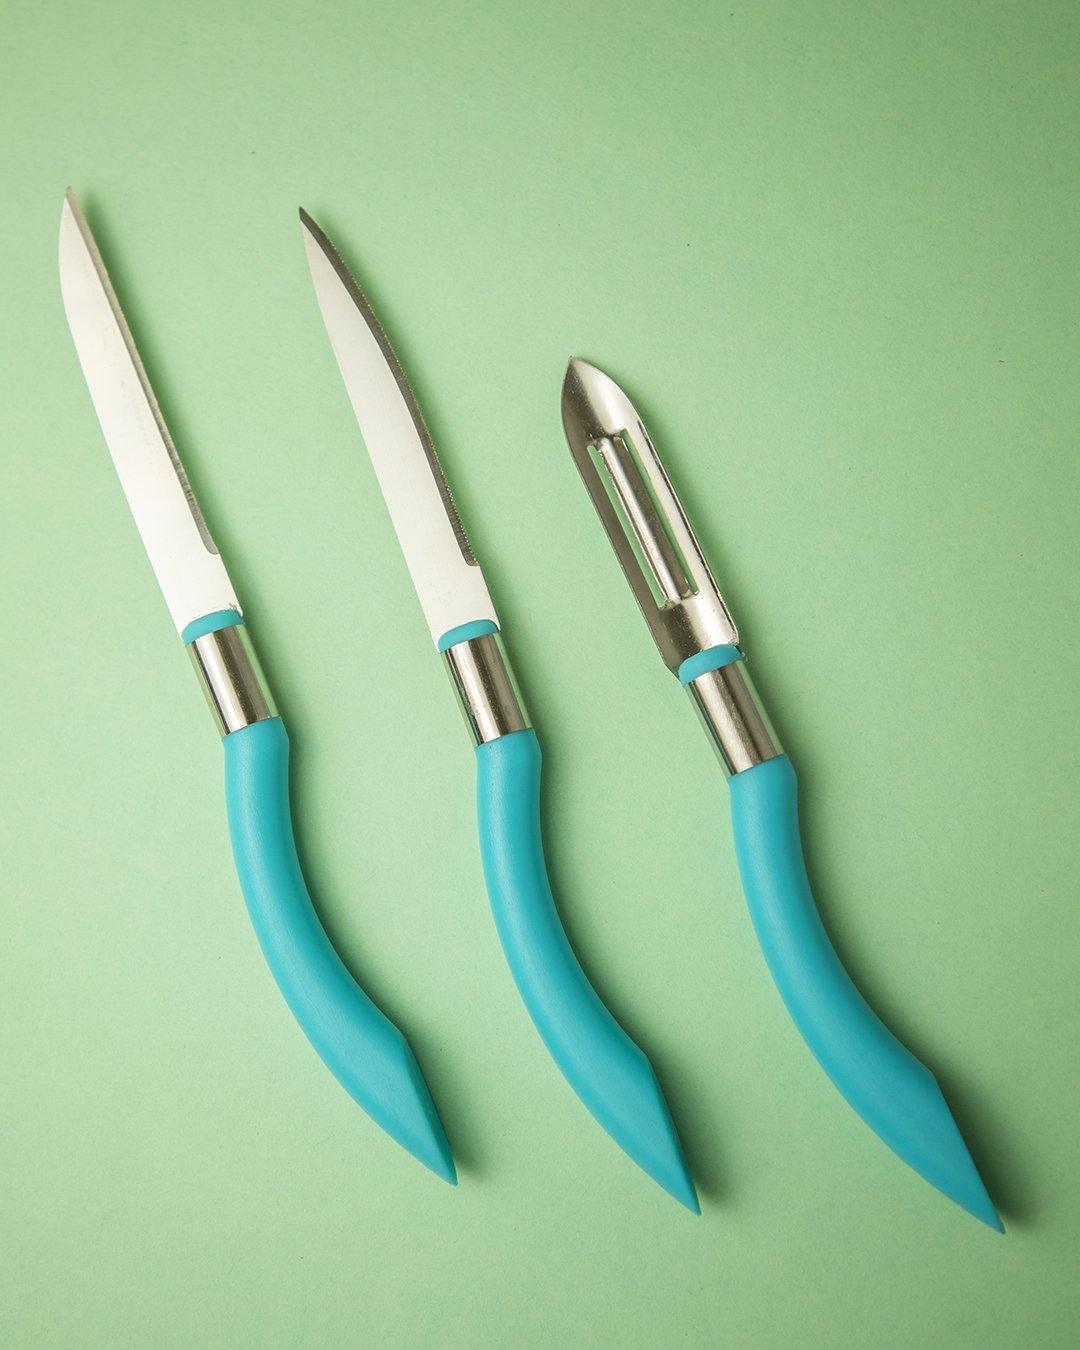 Kitchen Knife and Peeler, Blue, Stainless Steel, Set of 3 - MARKET 99